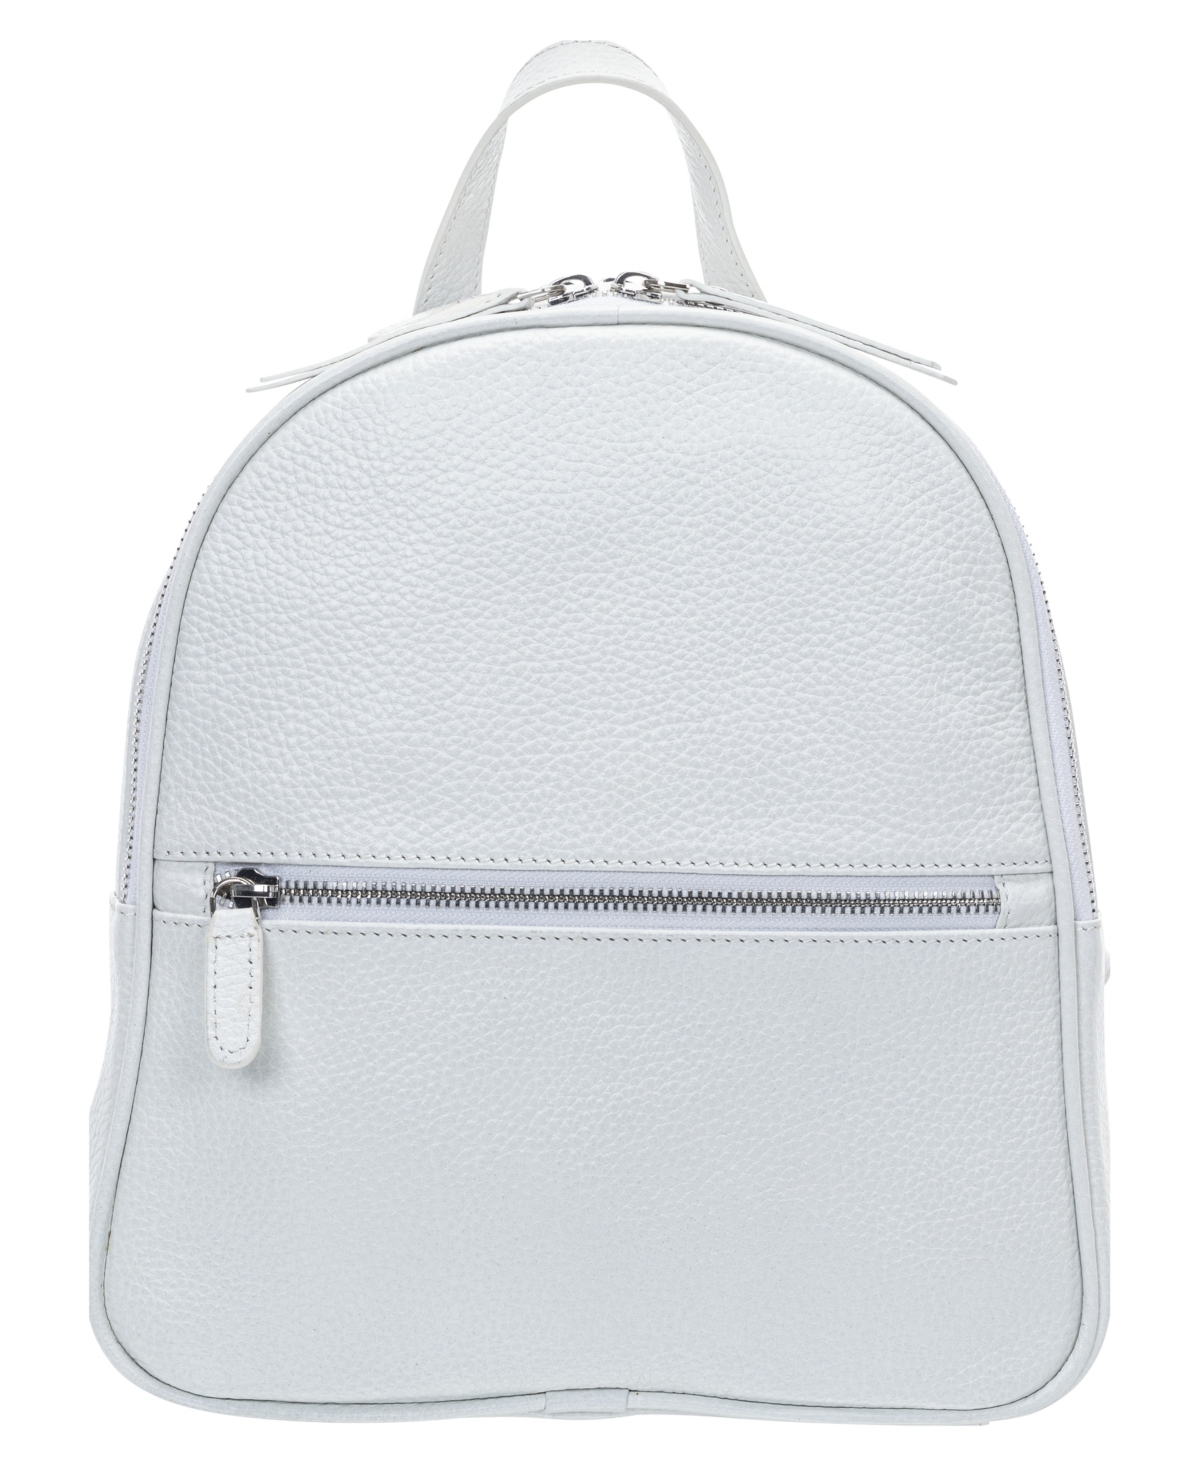 Mancini Women's Pebbled Audrey Backpack In White